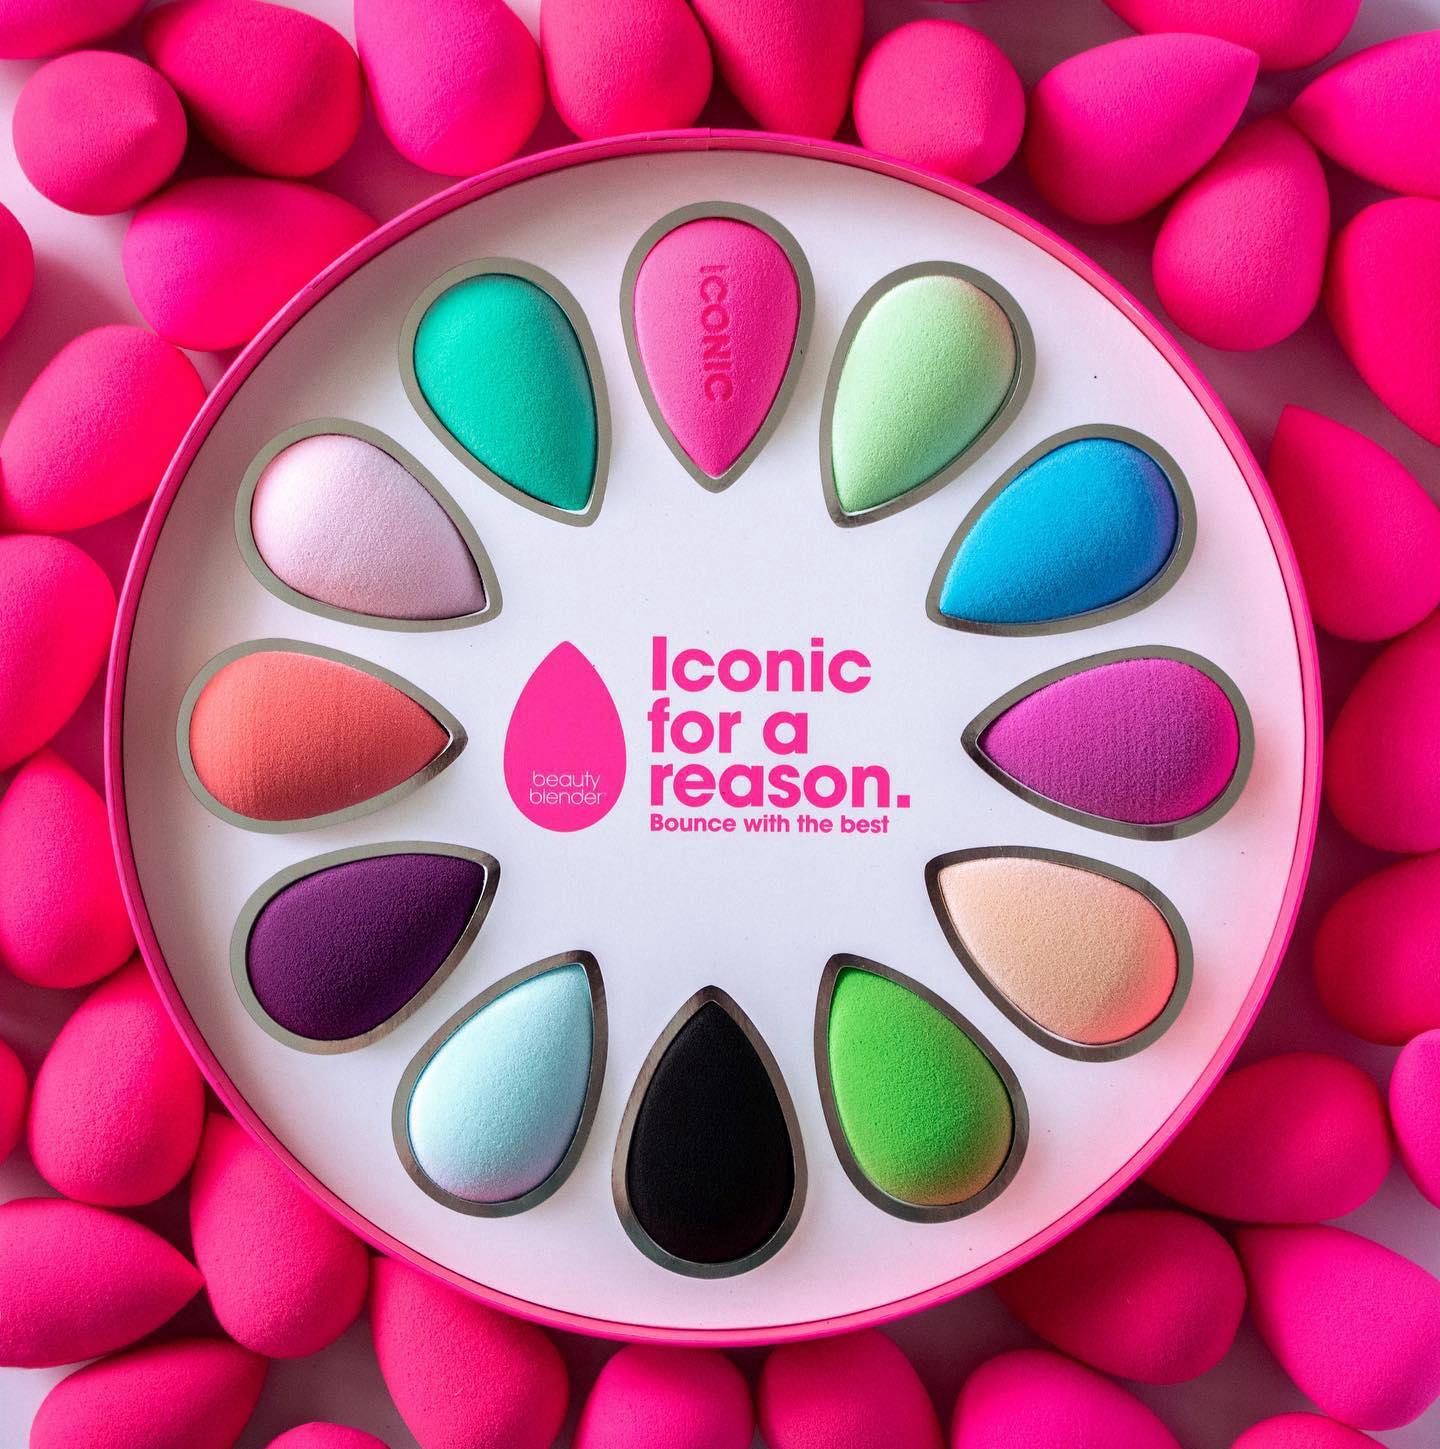 beautyblender - Post of the day : 1/10/2022